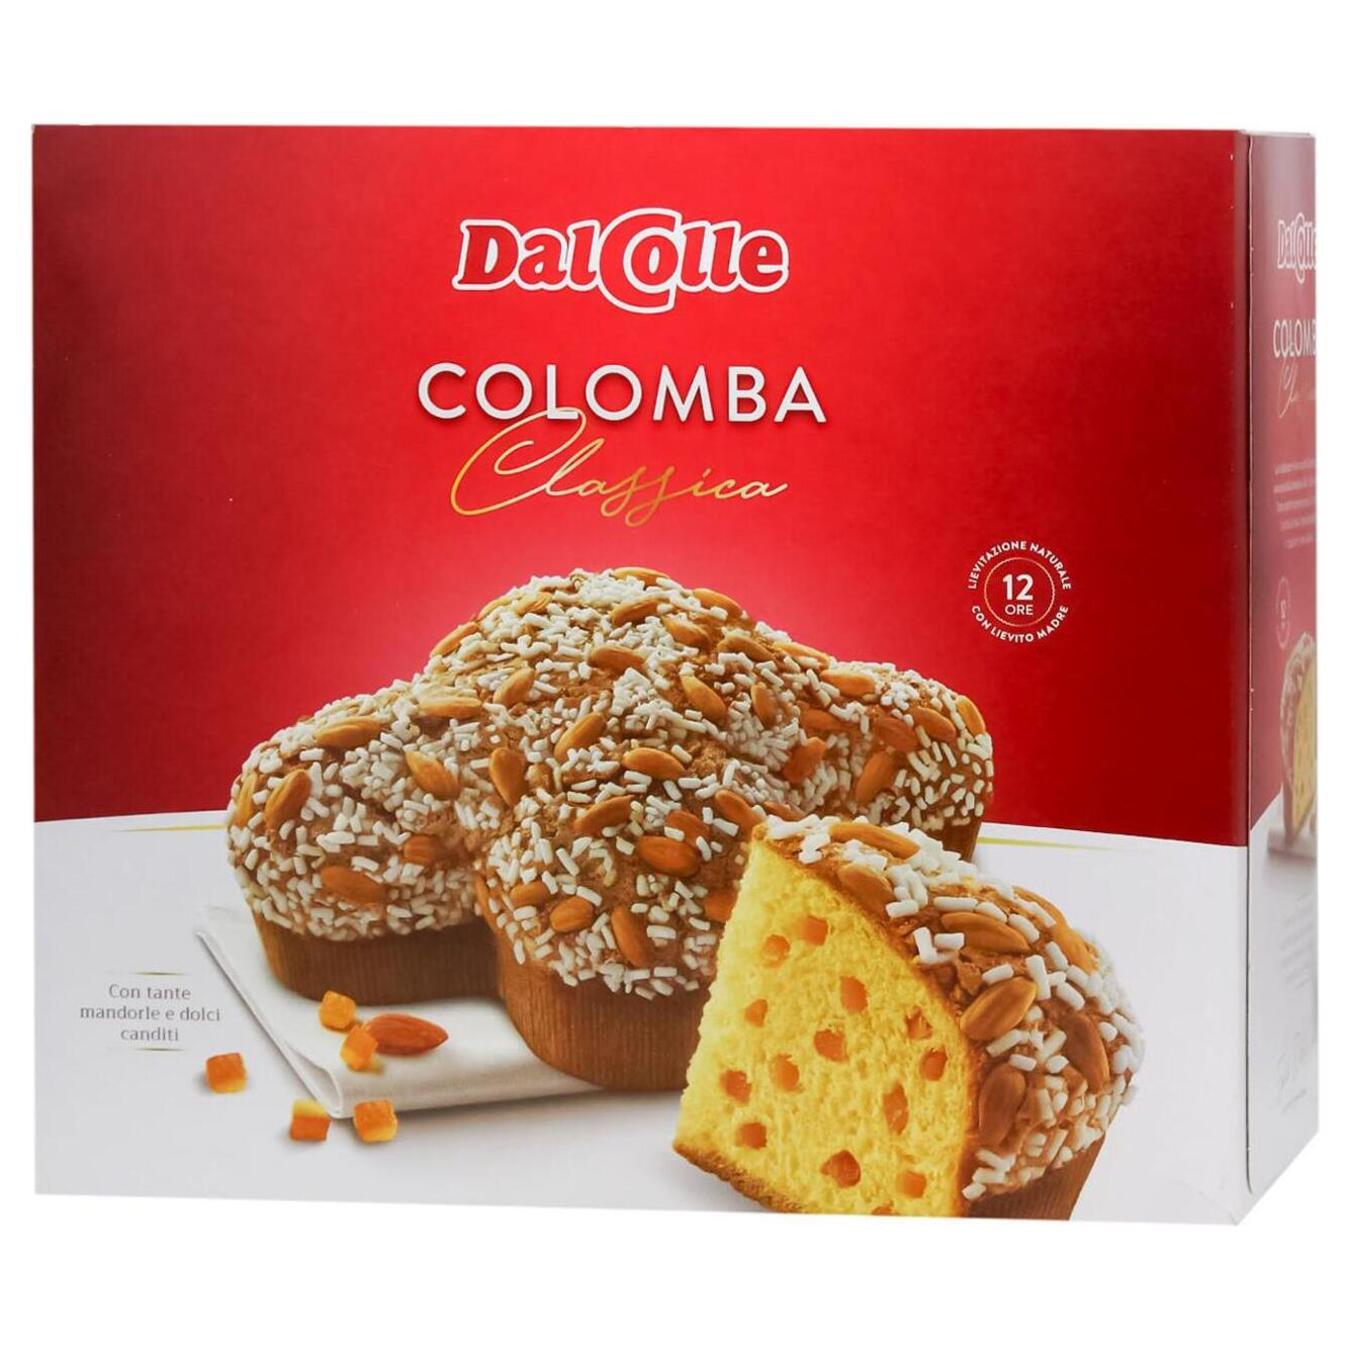 Panettone Dal Colle colomba classic with candied orange 1kg